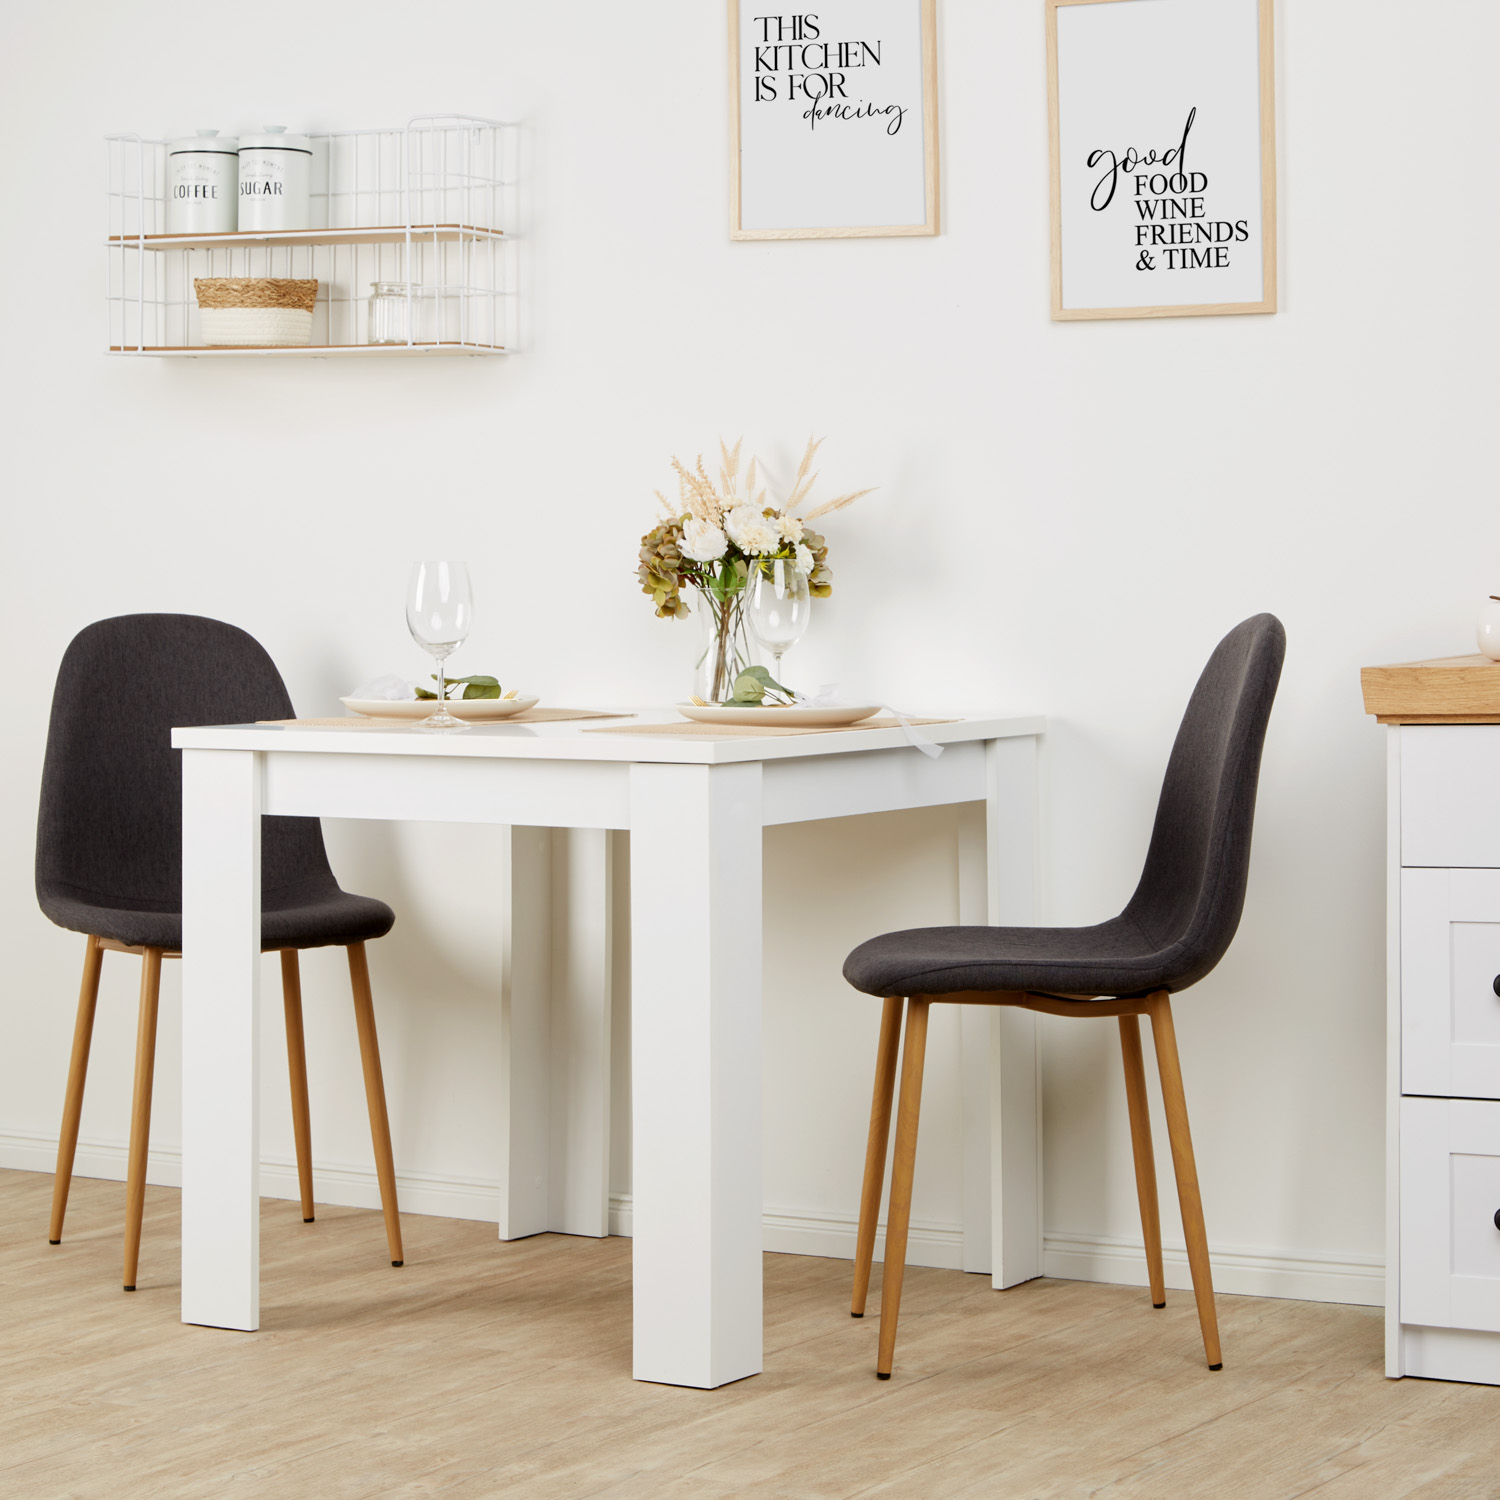 Modern White Dining Table 80x80 cm with 2 Chairs Anthracite Dining Room Table Wooden Table